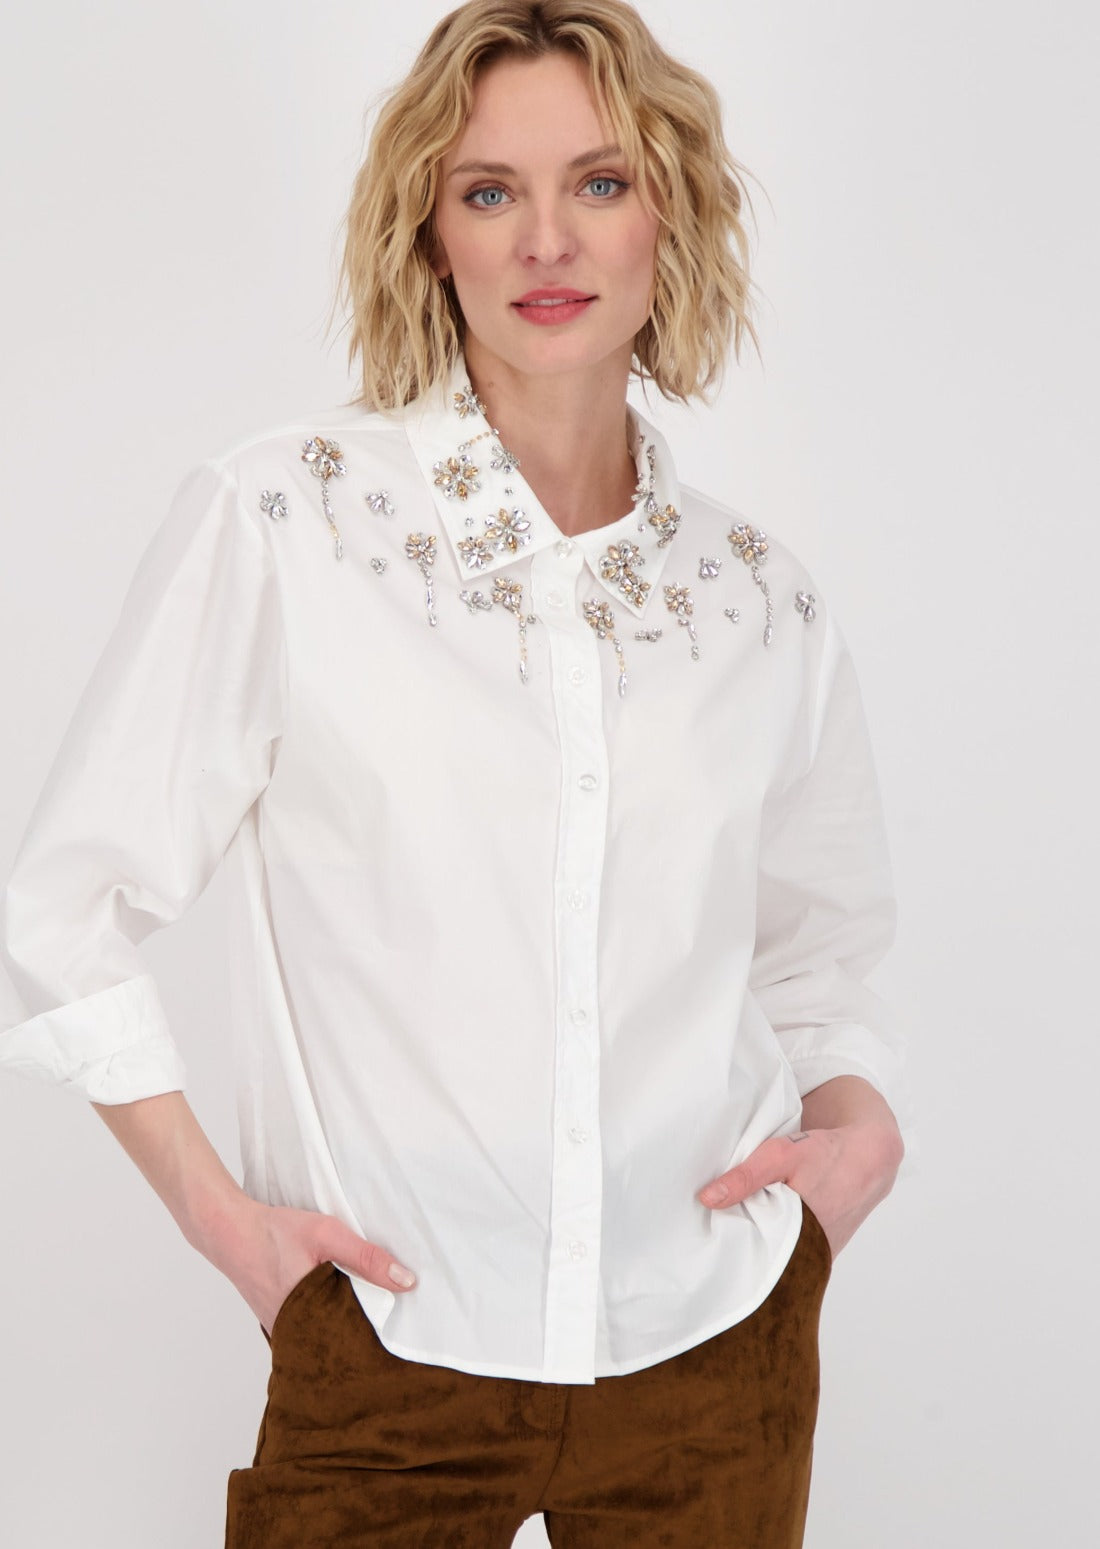 Gabby Isabella - Floral Jewelled Collar Blouse